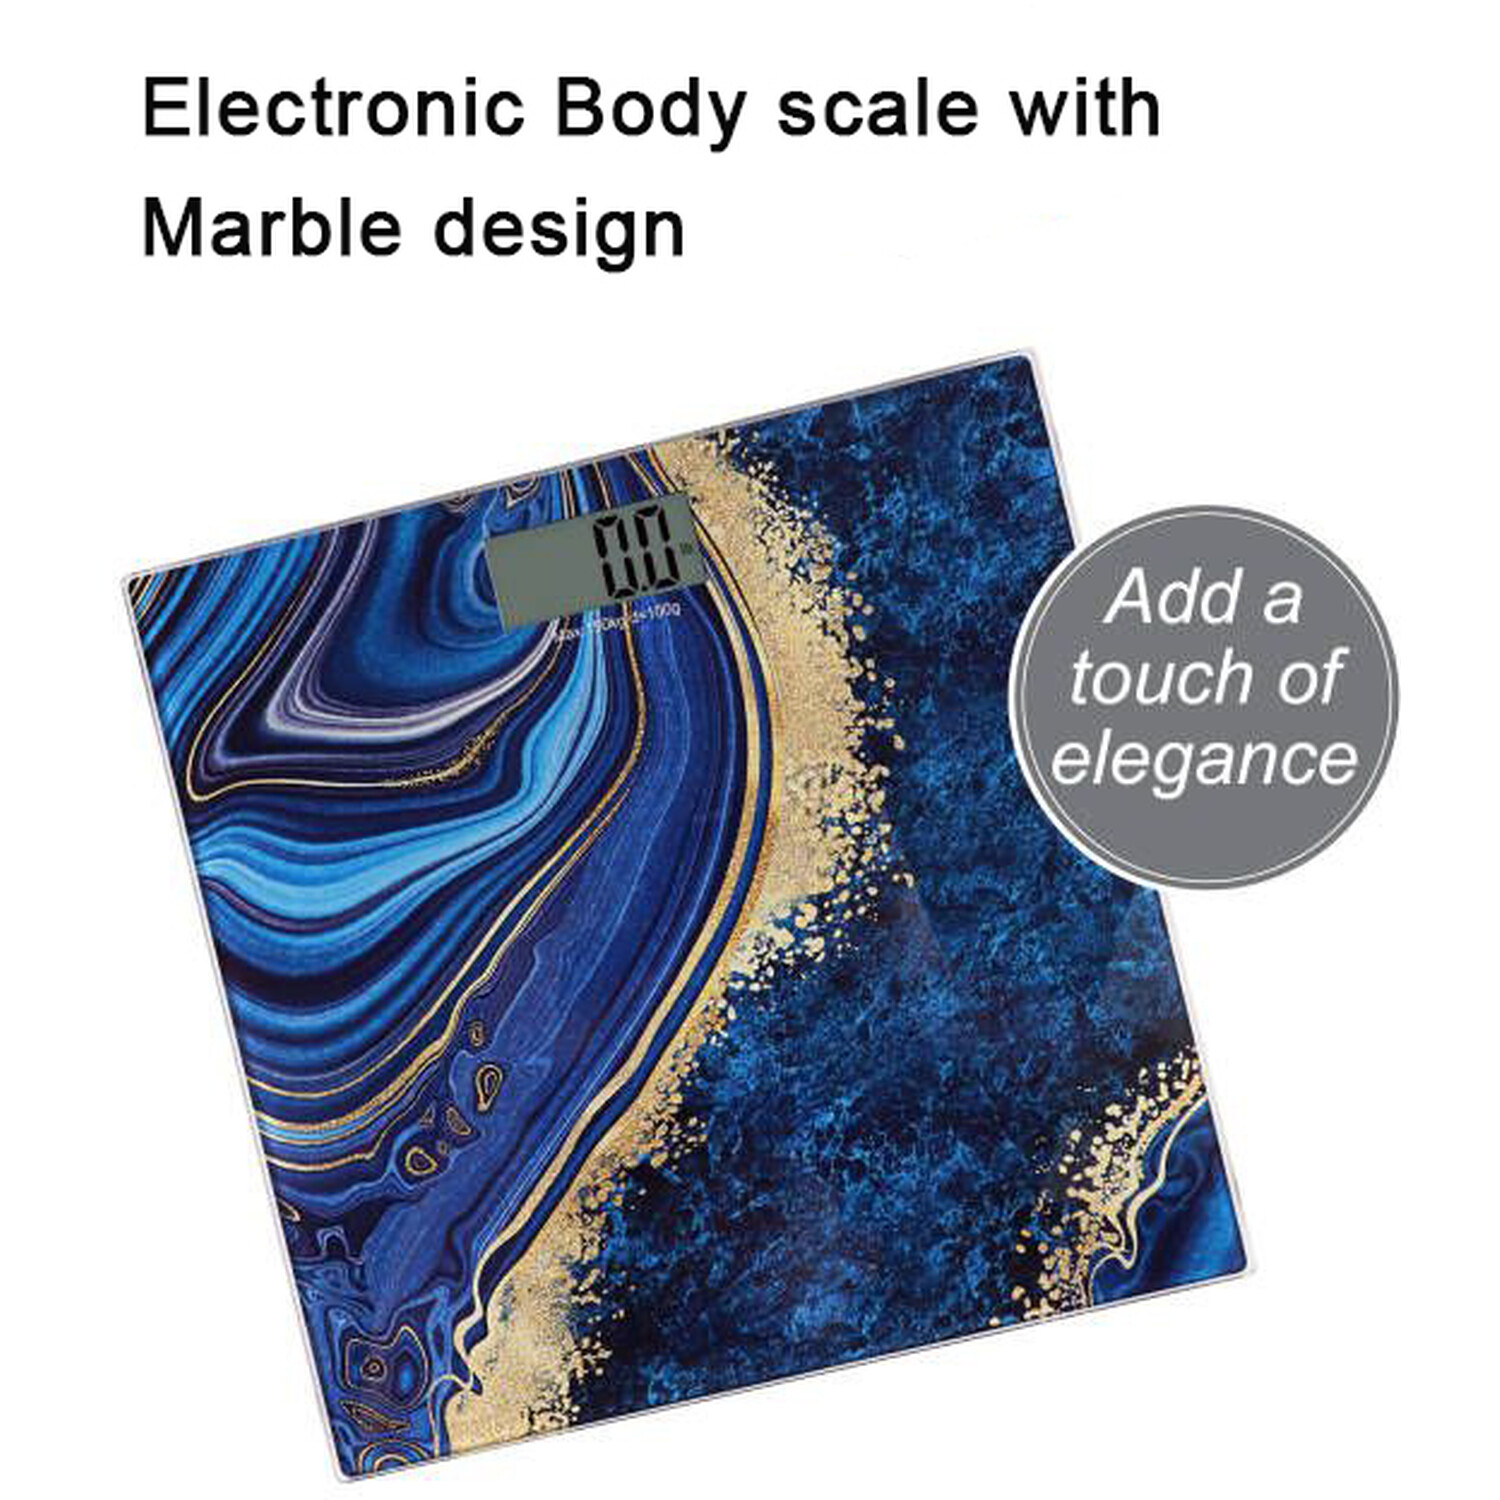 Blue Marble Print Electronic Bathroom Scale Image 2